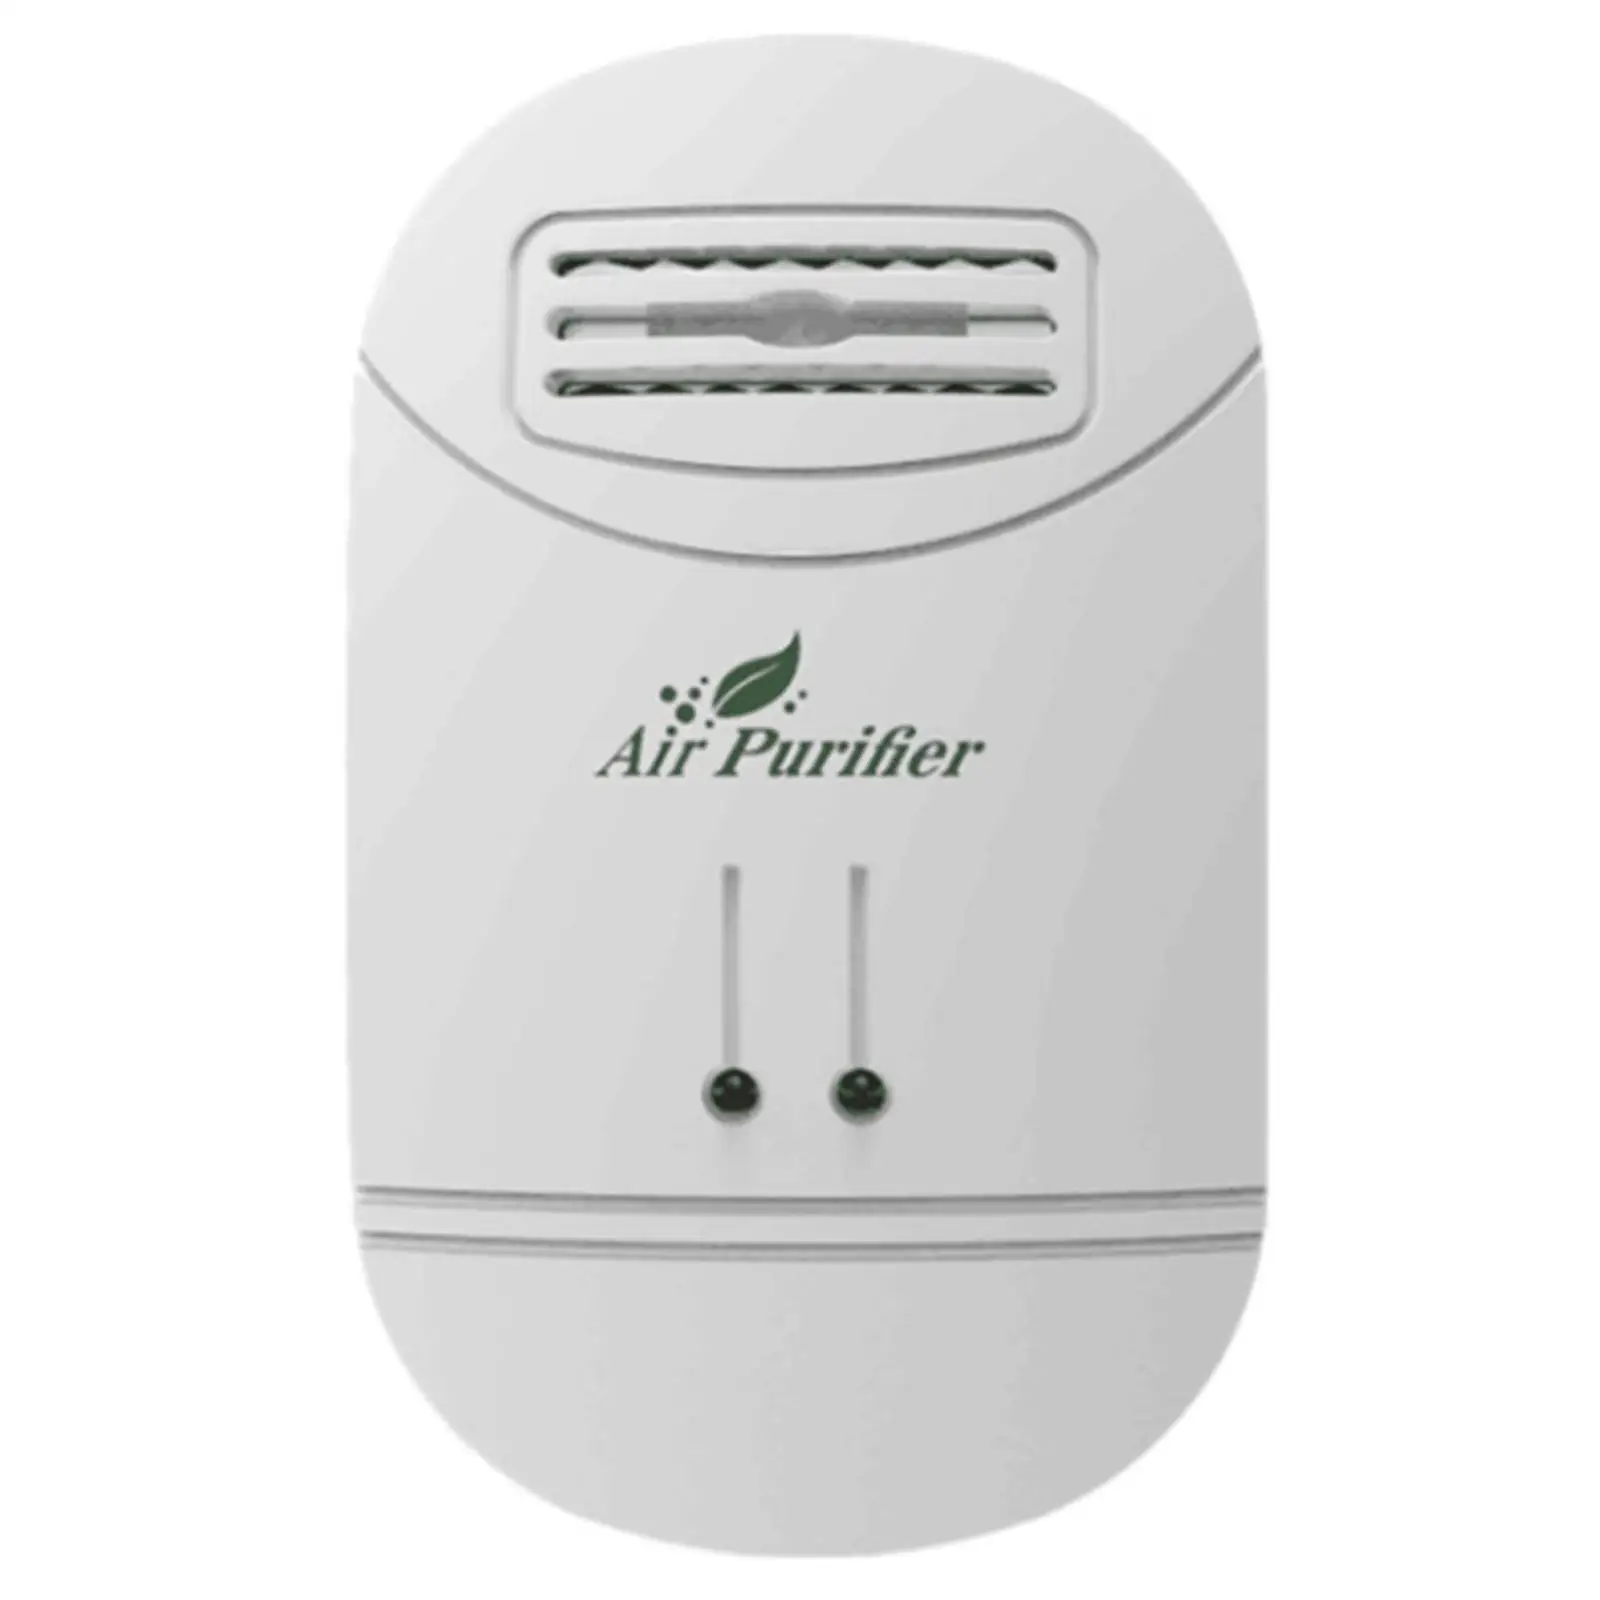 Small Negative Ion Air Purifier Mute Plug and Play Removal Deodorizer Freshener Air Cleaner for Tabletop Office Car